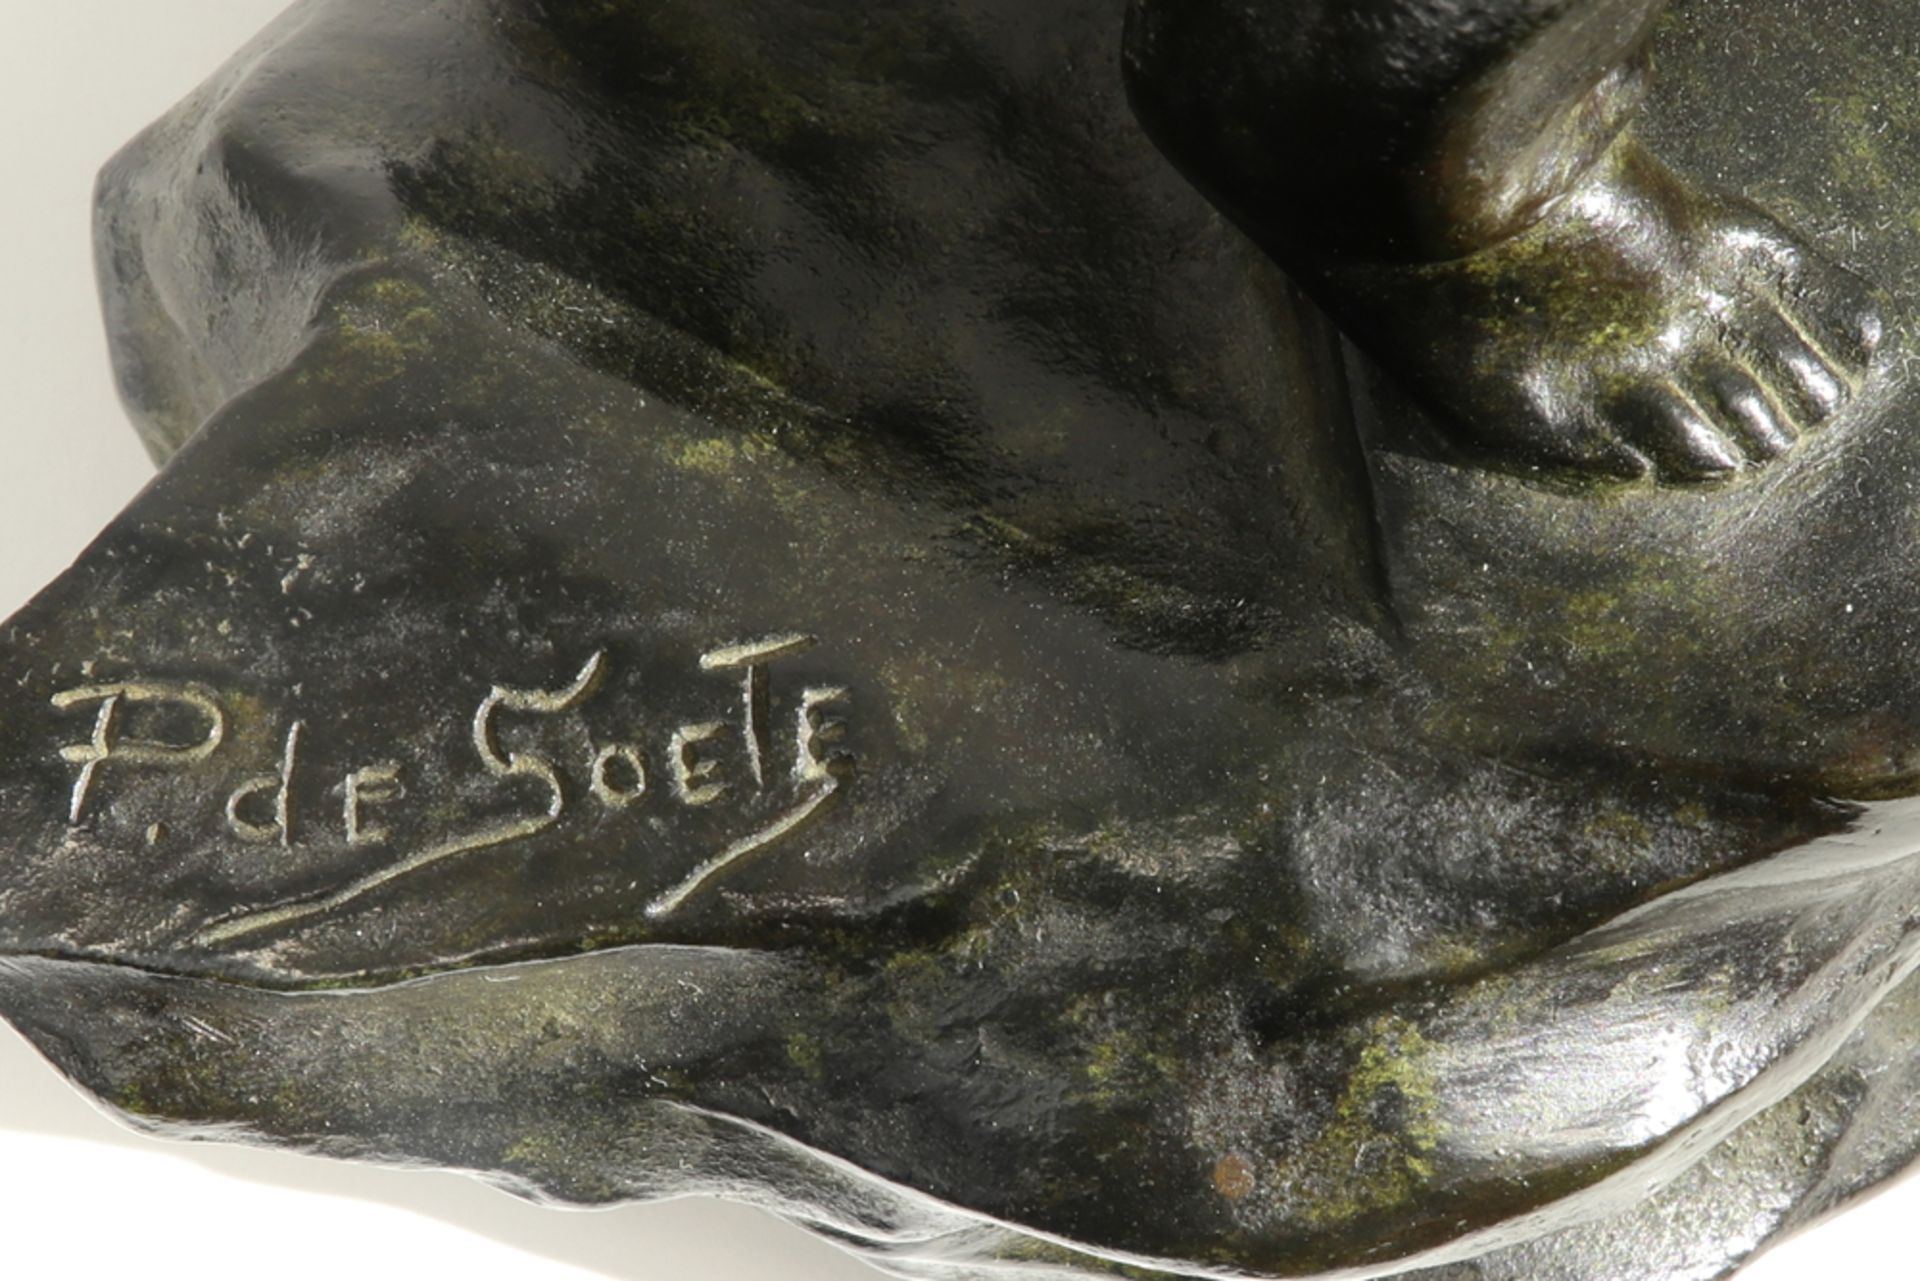 early 20th Cent. "Fisherman" sculpture in bronze - signed Pierre de Soete the big version of this - Image 5 of 5